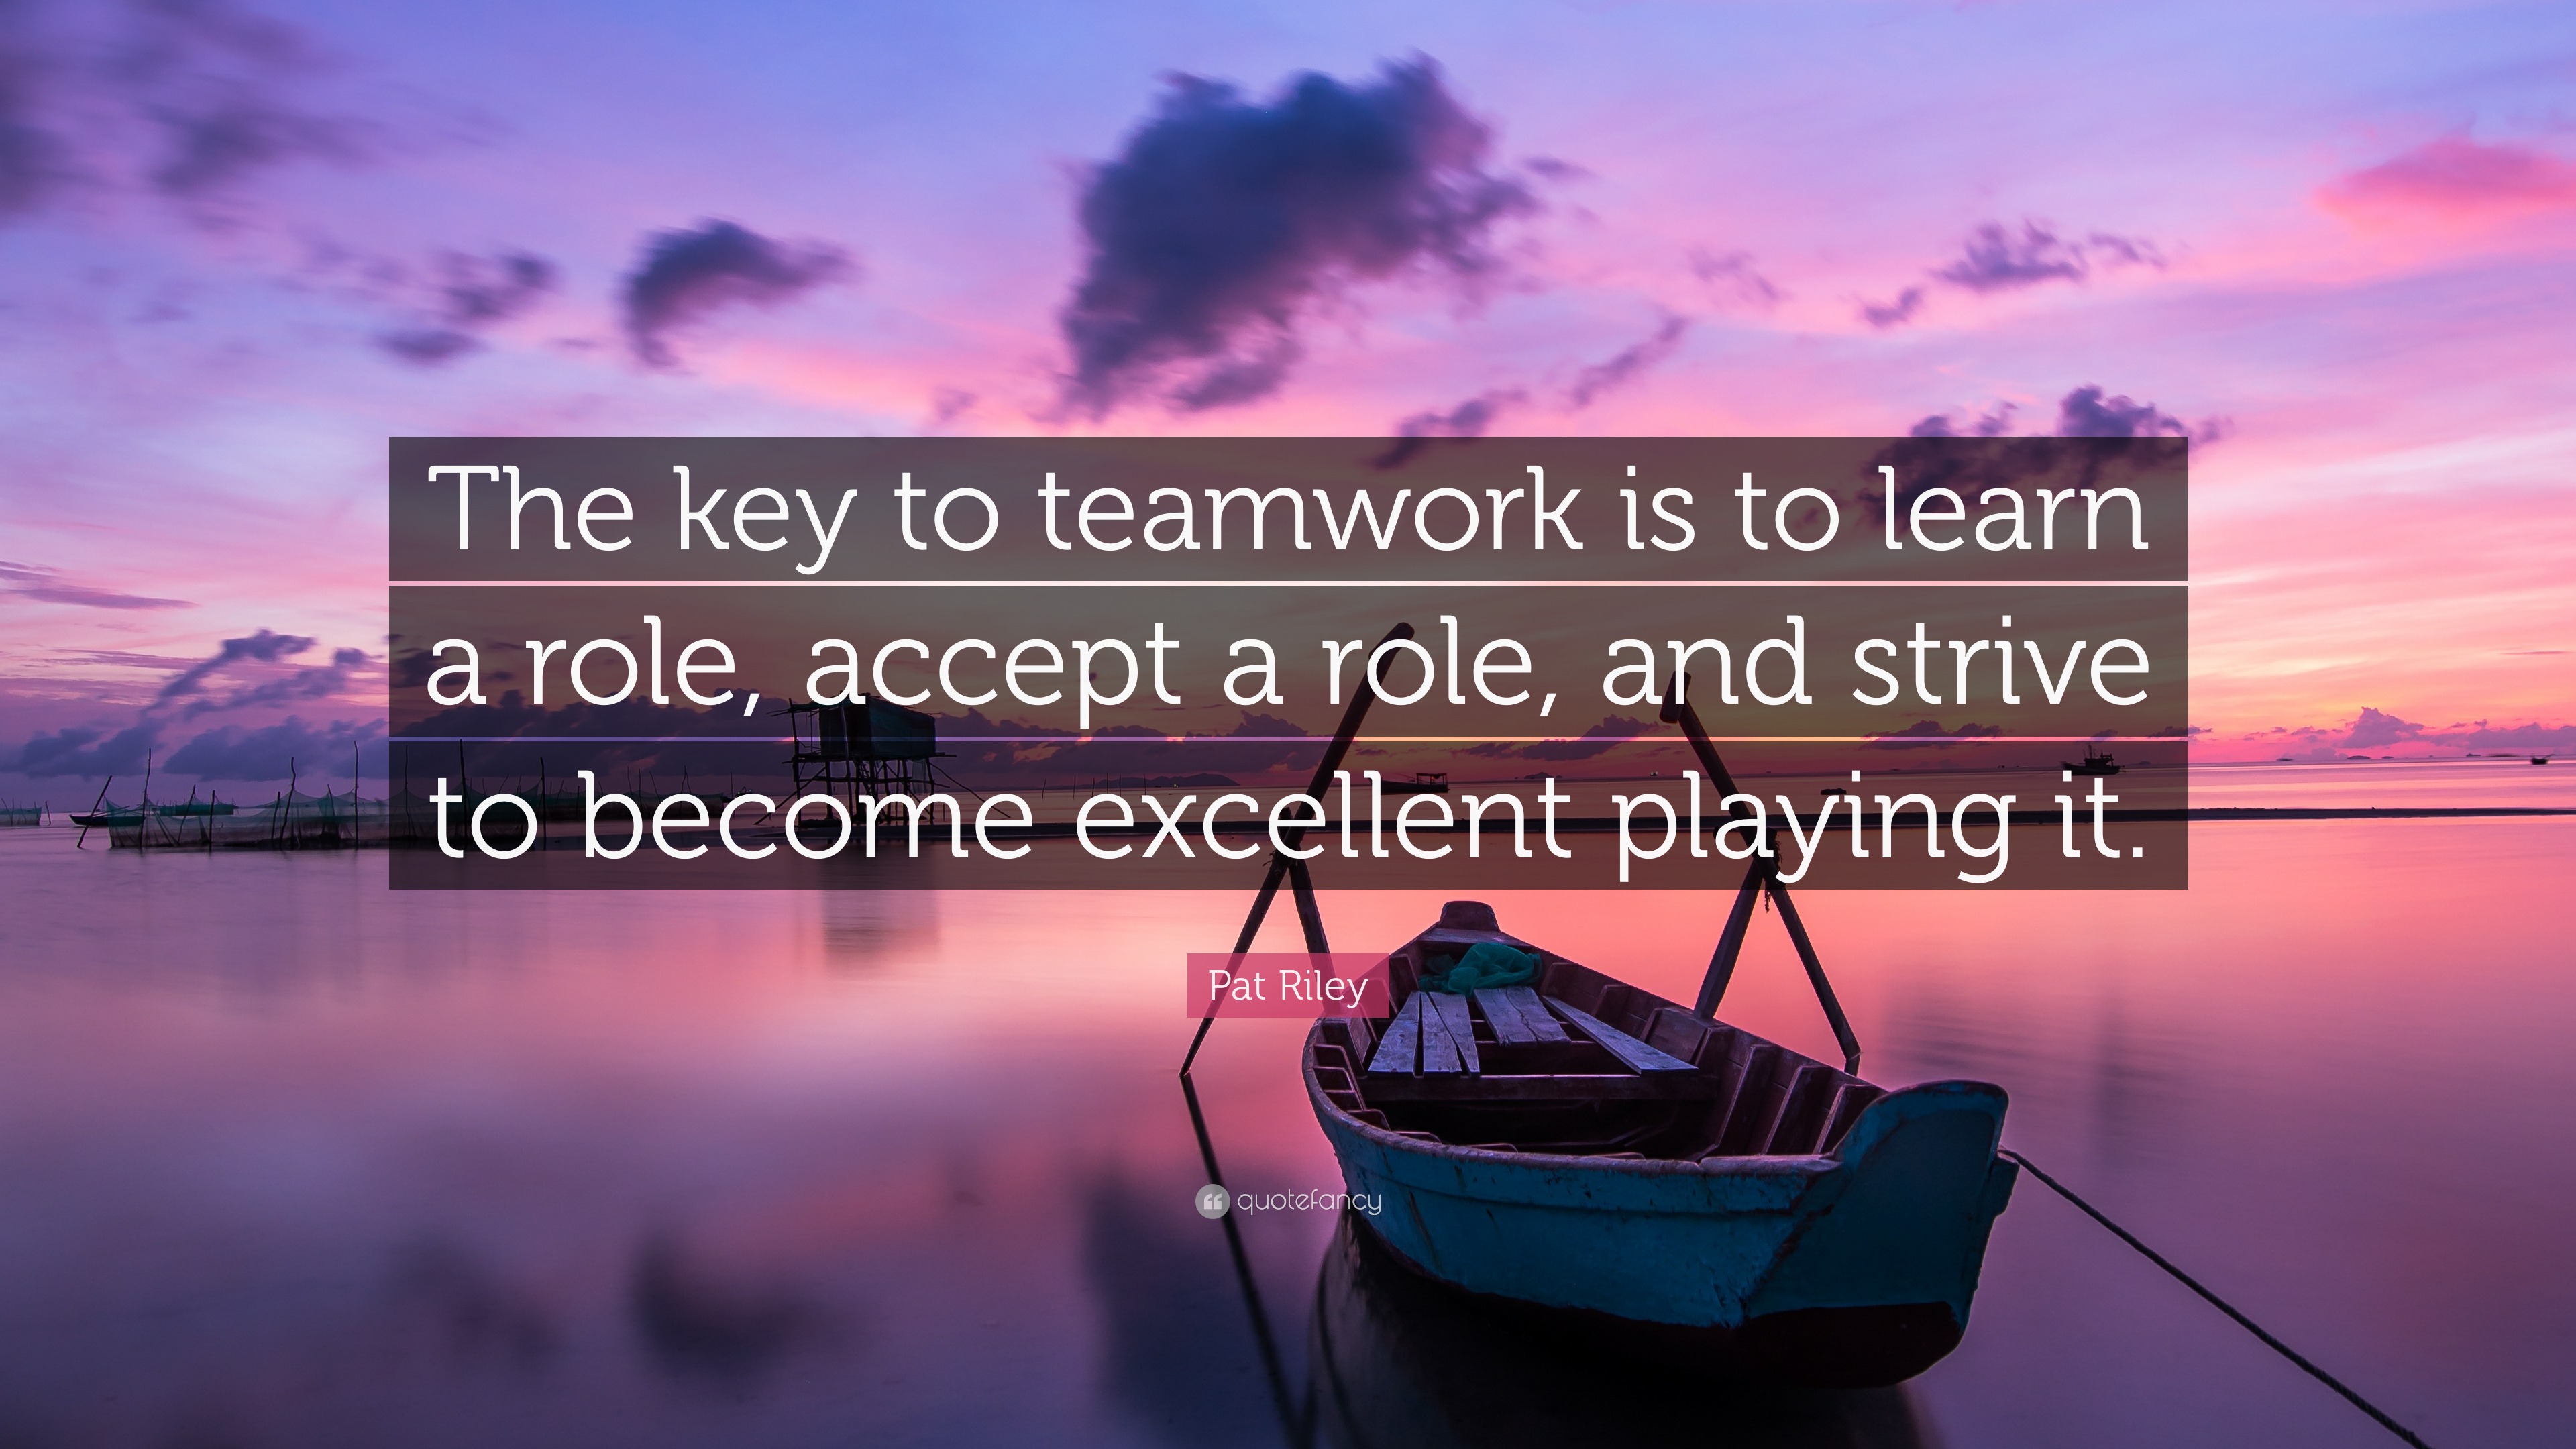 Pat Riley Quote: "The key to teamwork is to learn a role, accept a role ...